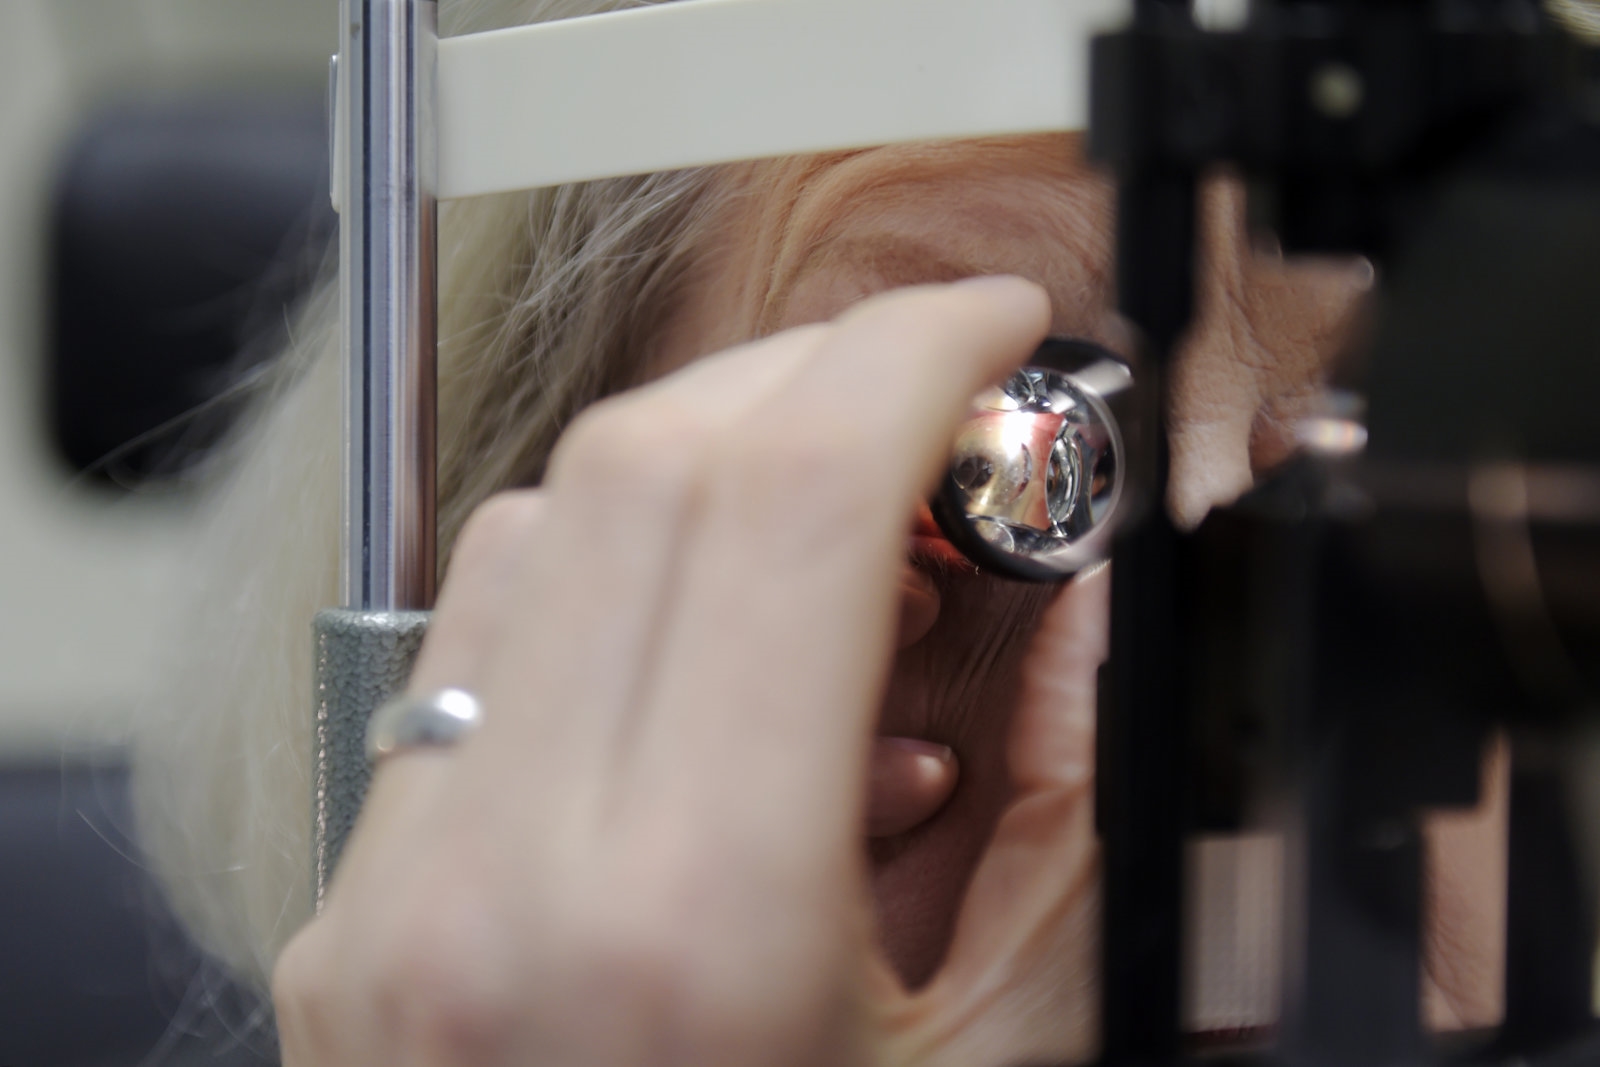 Magnetic eye implants could save the eyesight of glaucoma patients | DeviceDaily.com